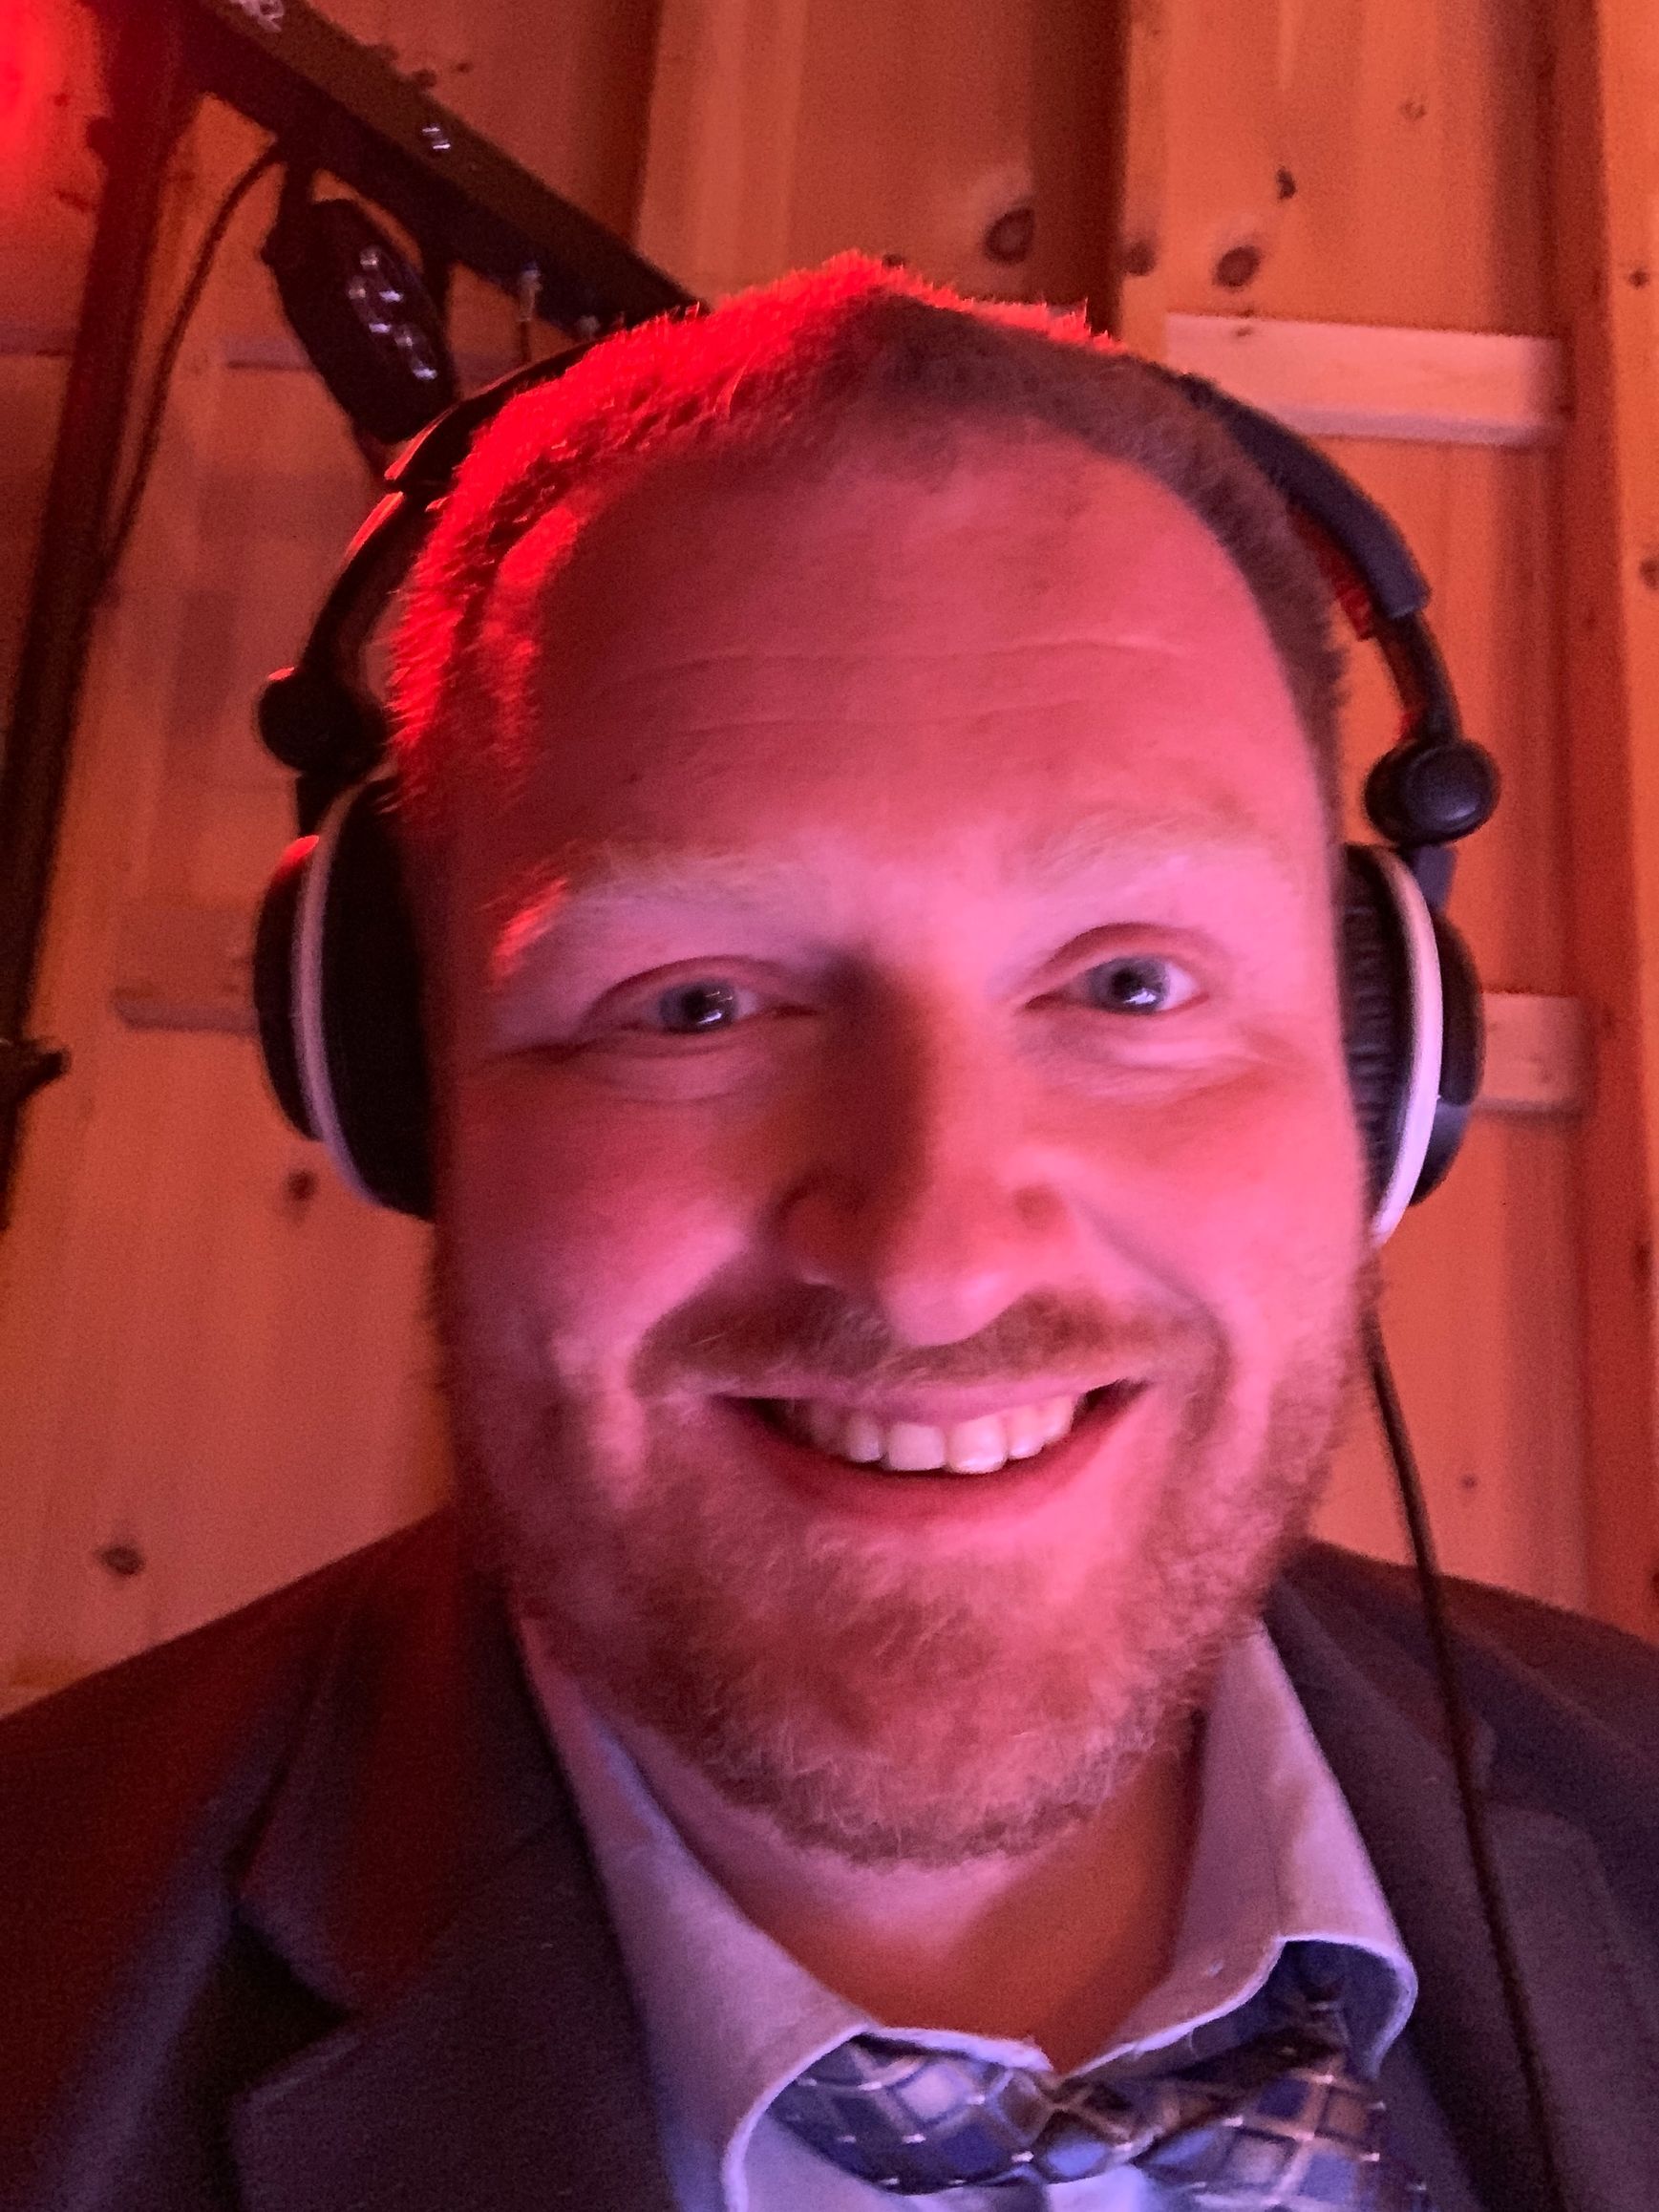 A man with a beard is wearing headphones and smiling.